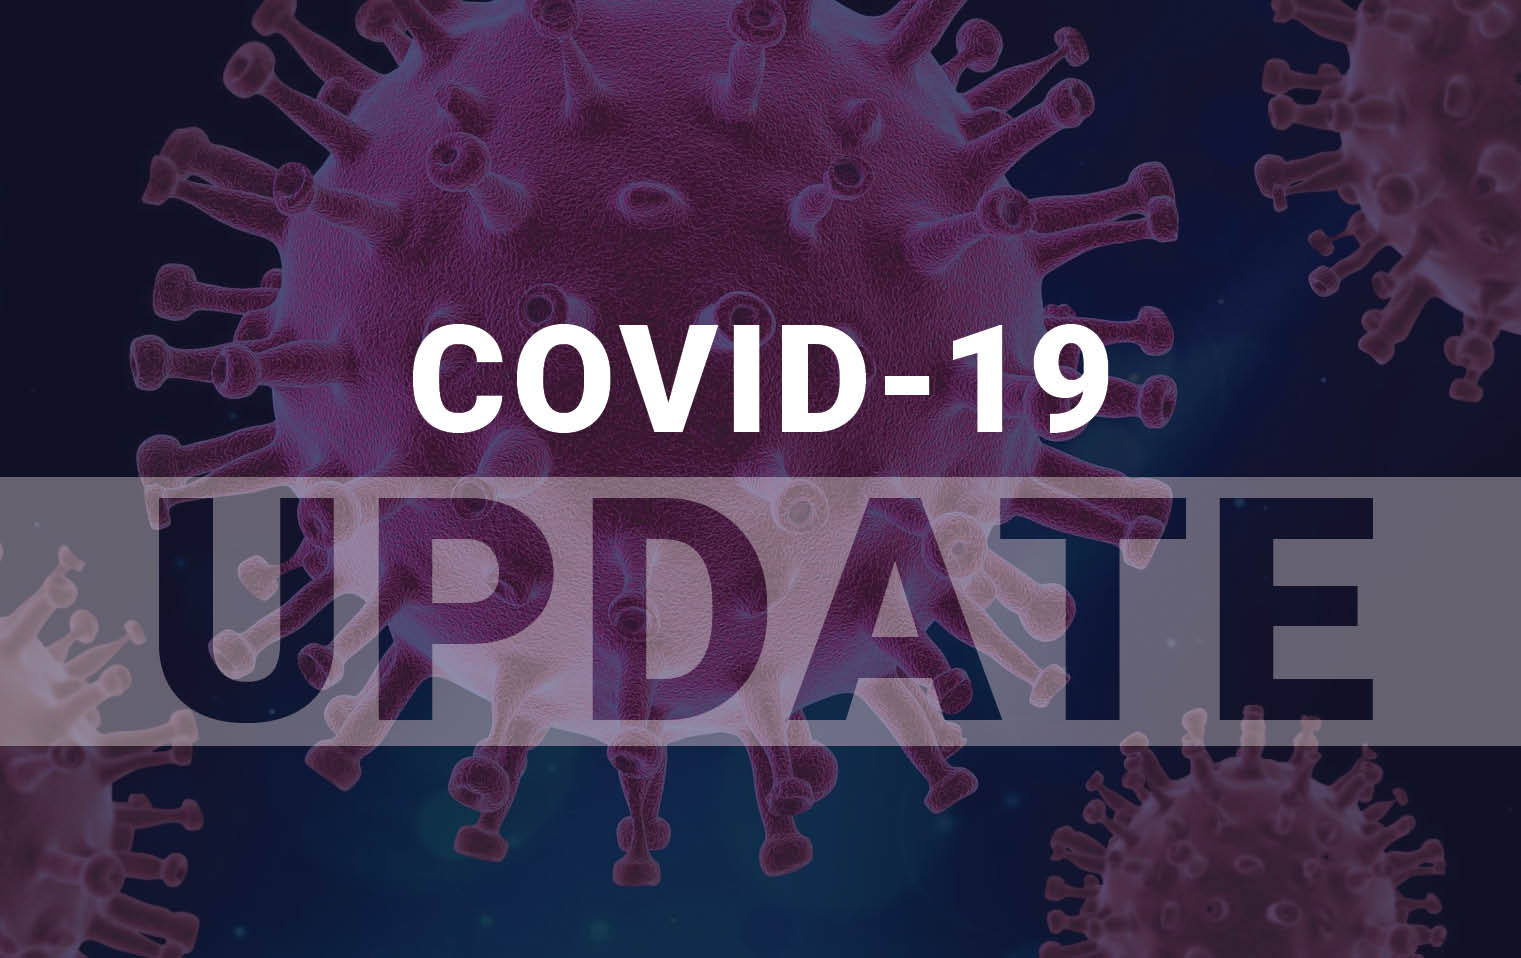 COVID-19 cell graphic